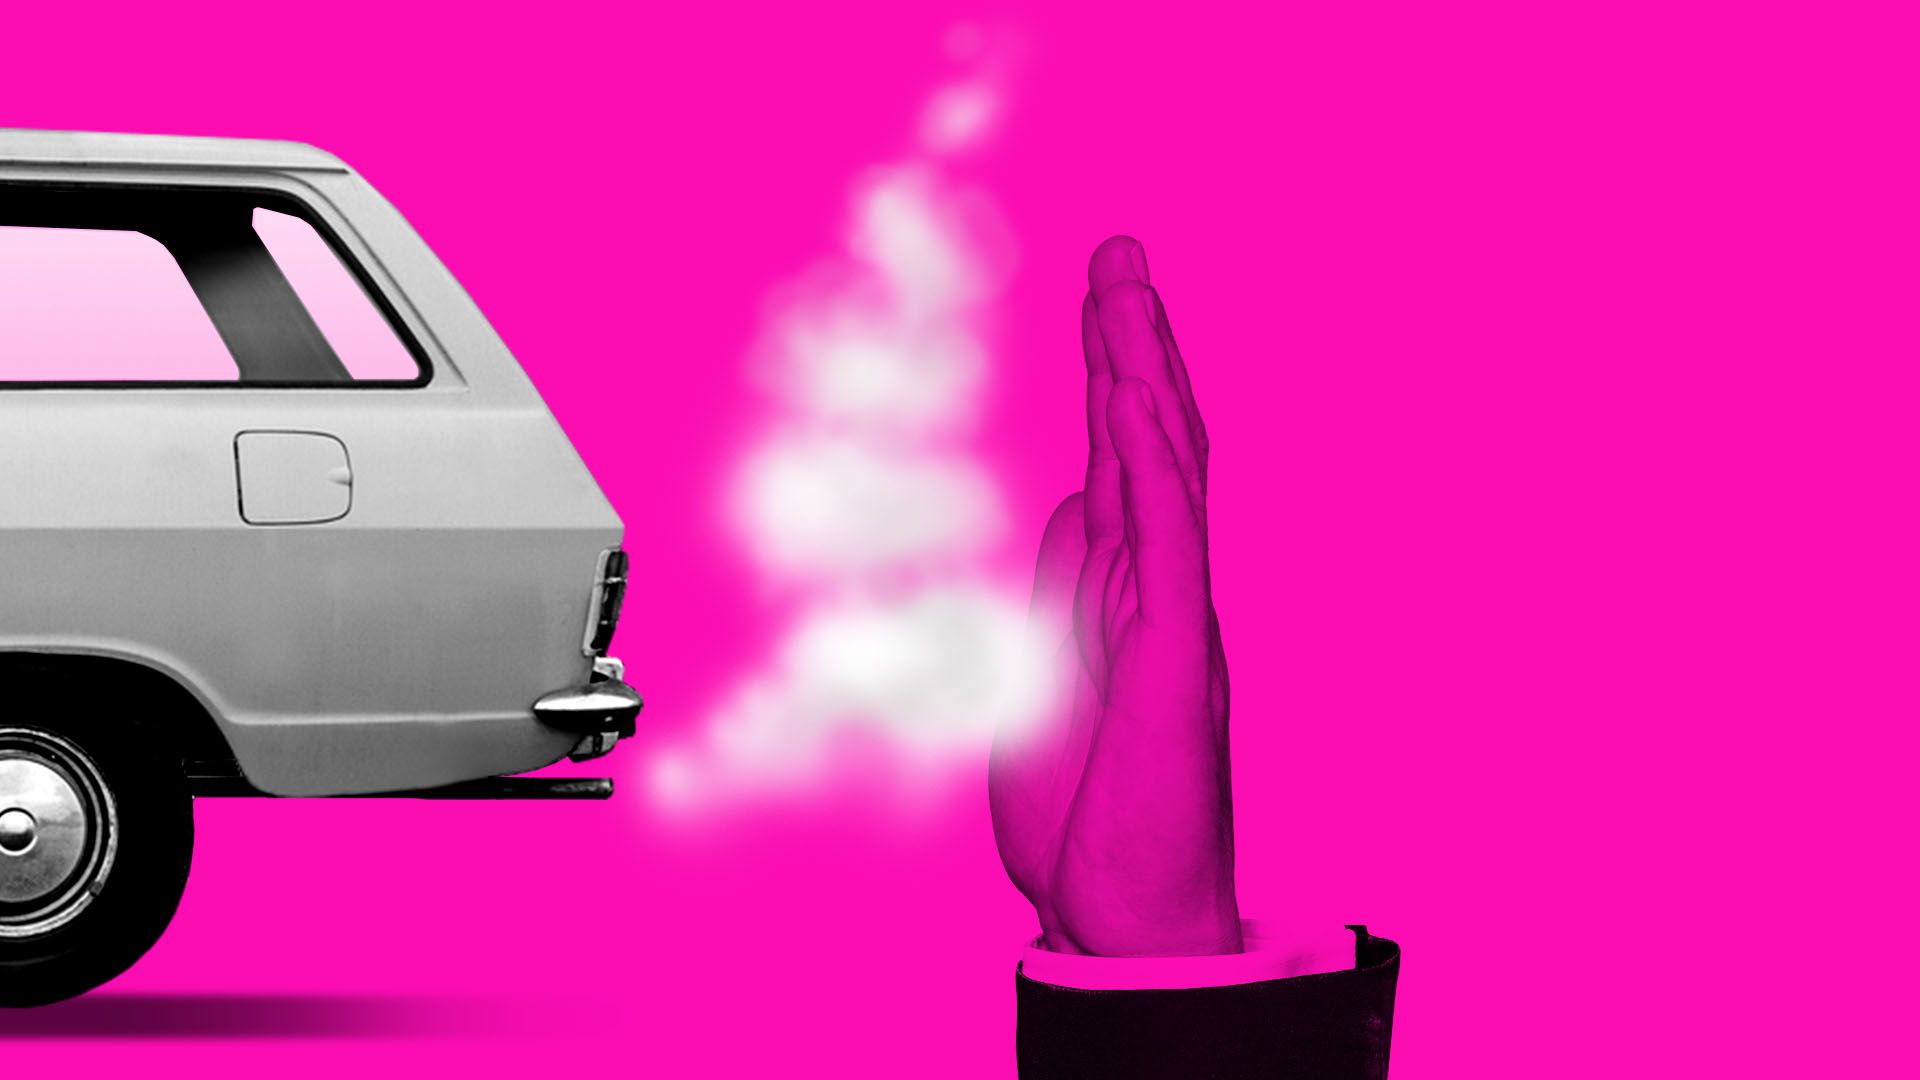  Illustration of exhaust from car tailpipe being stopped by a giant hand